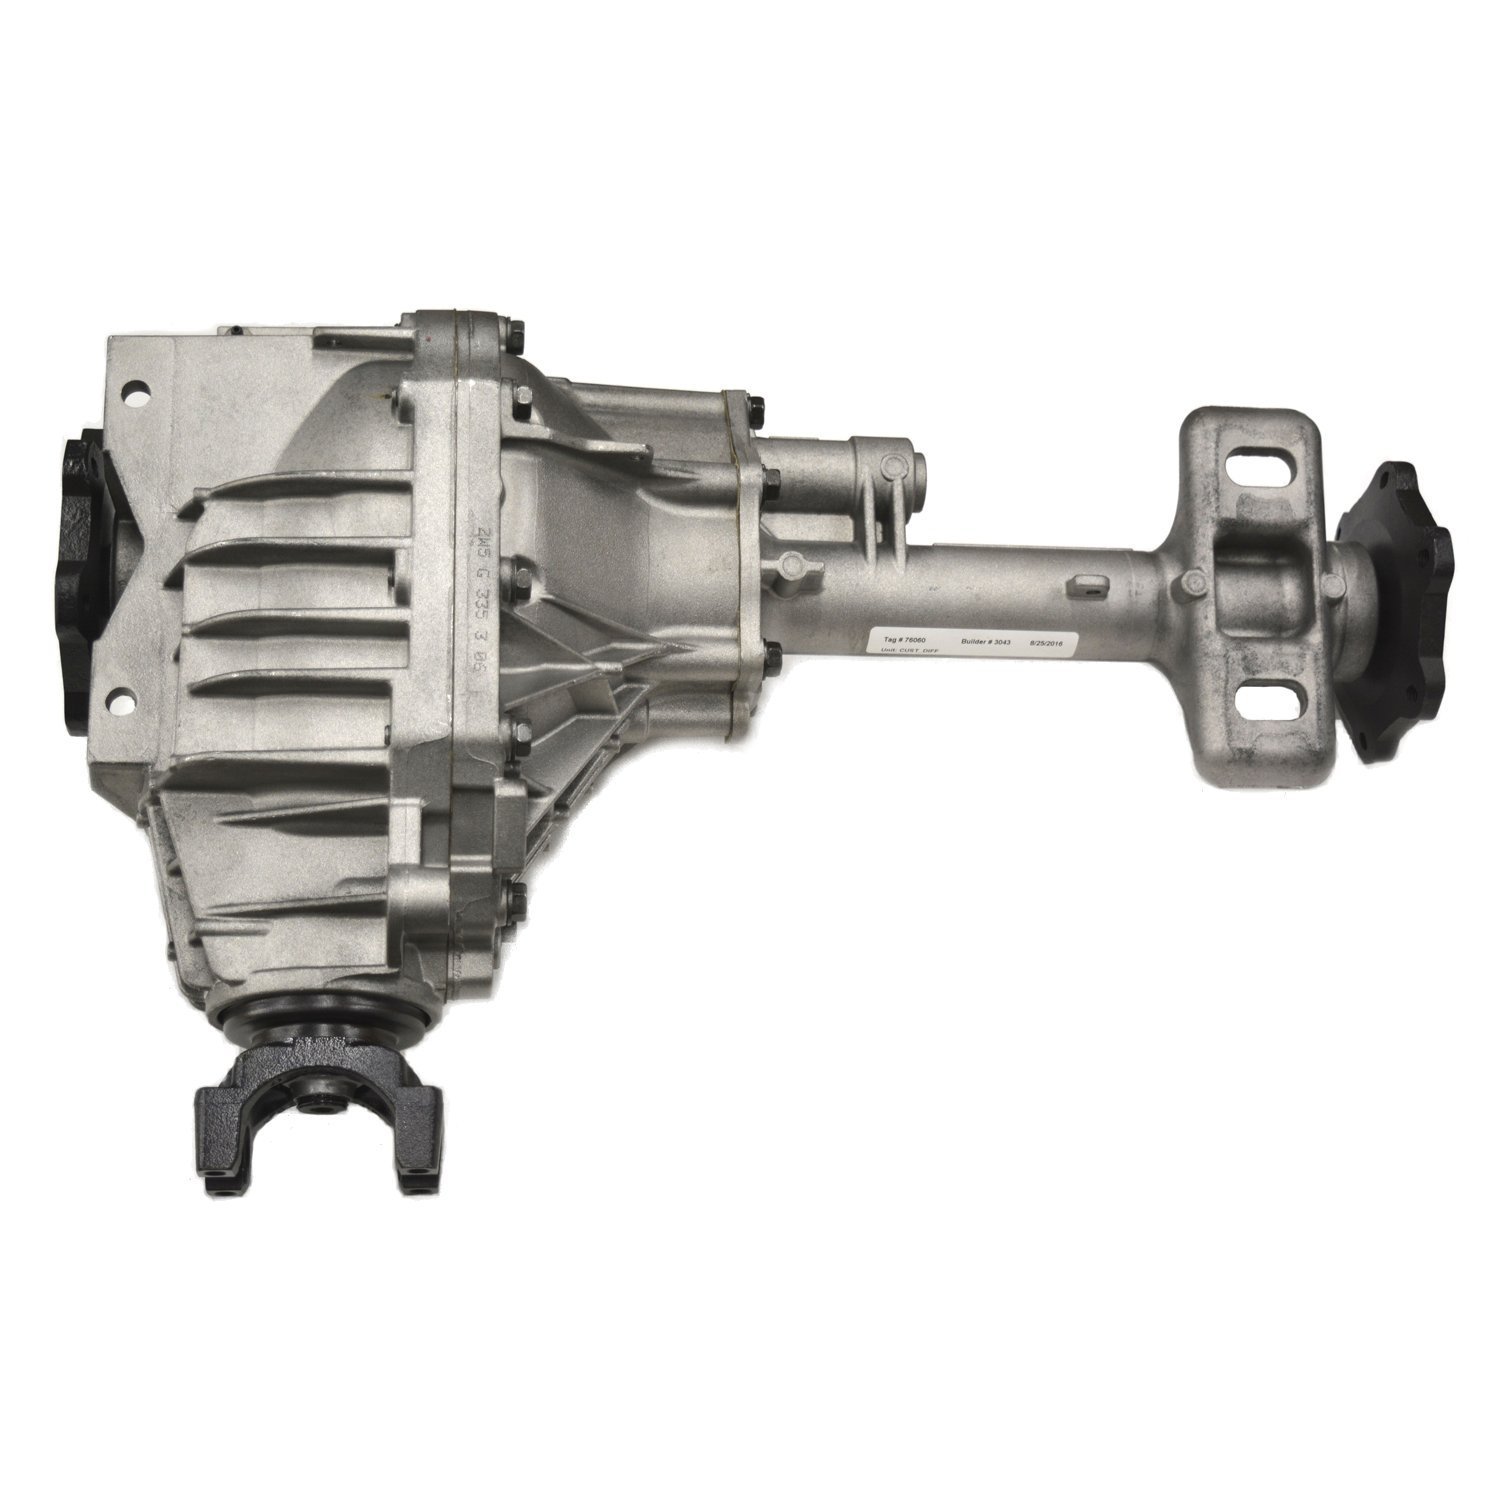 RAA440-1478X Front Axle Assembly, Chrysler 8.25 IFS, '13-'14 GM 1500 Pickup & Suv, 3.73 Ratio, Open